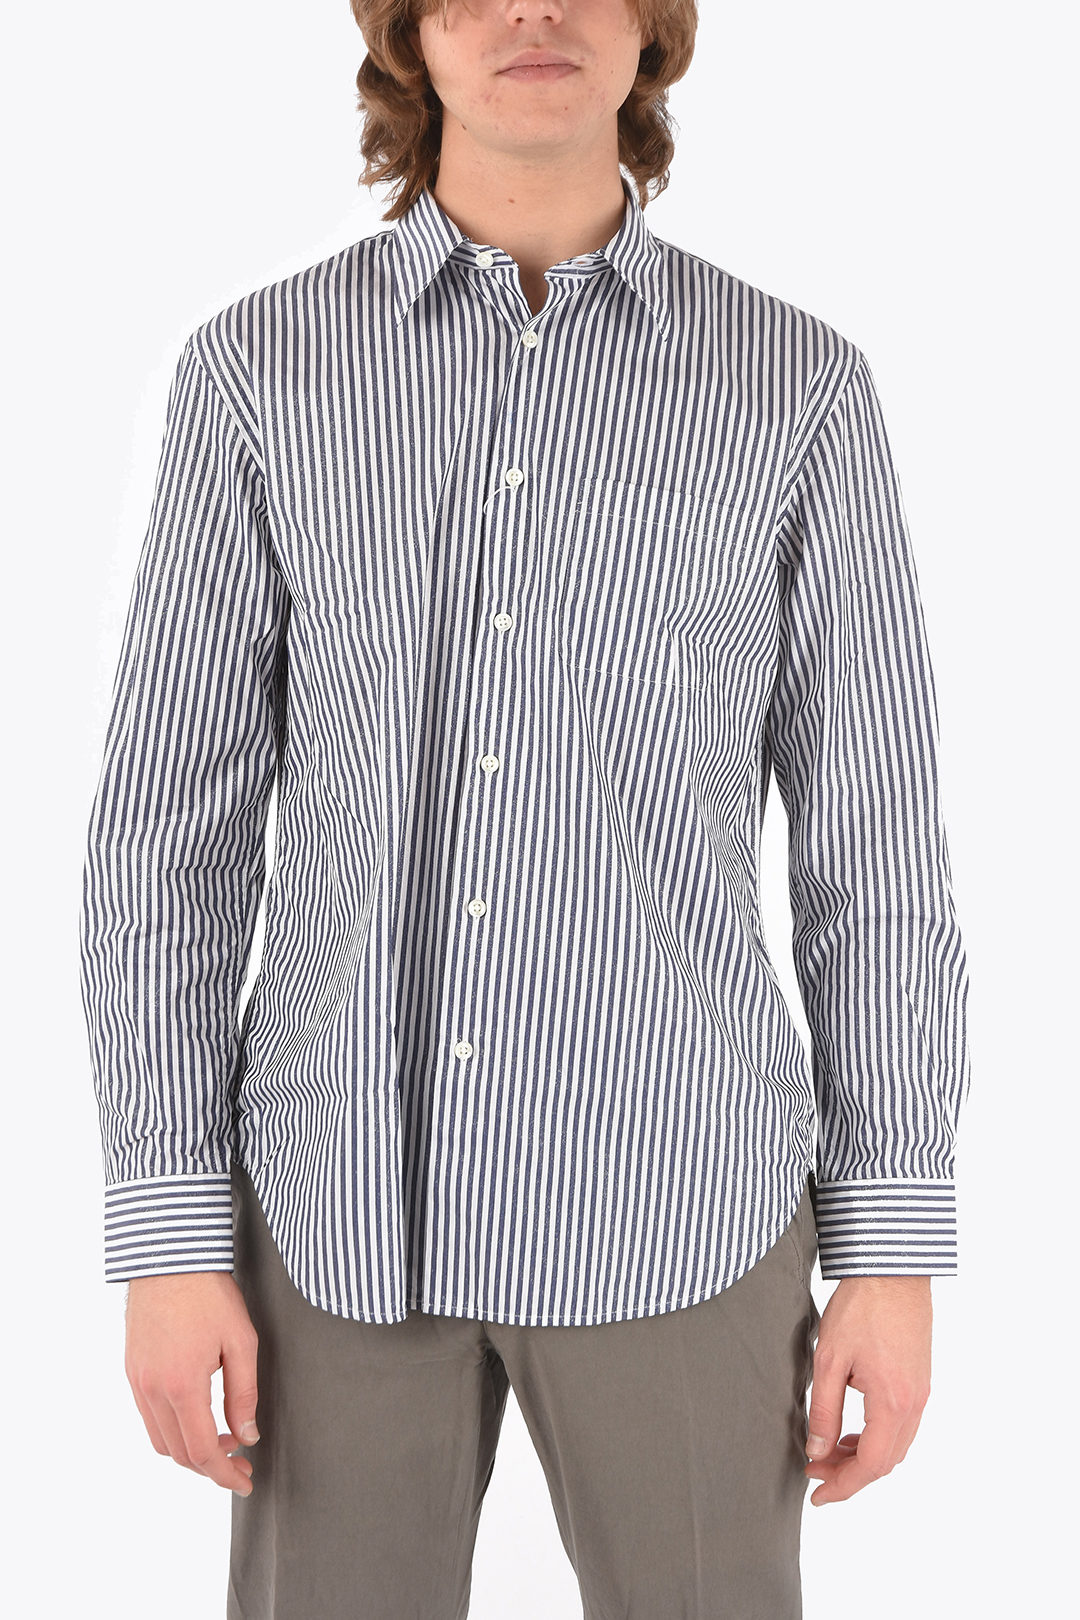 Sunflower Glittery ADRIAN Shirt in Awning Stripe with Breast Pocket men ...